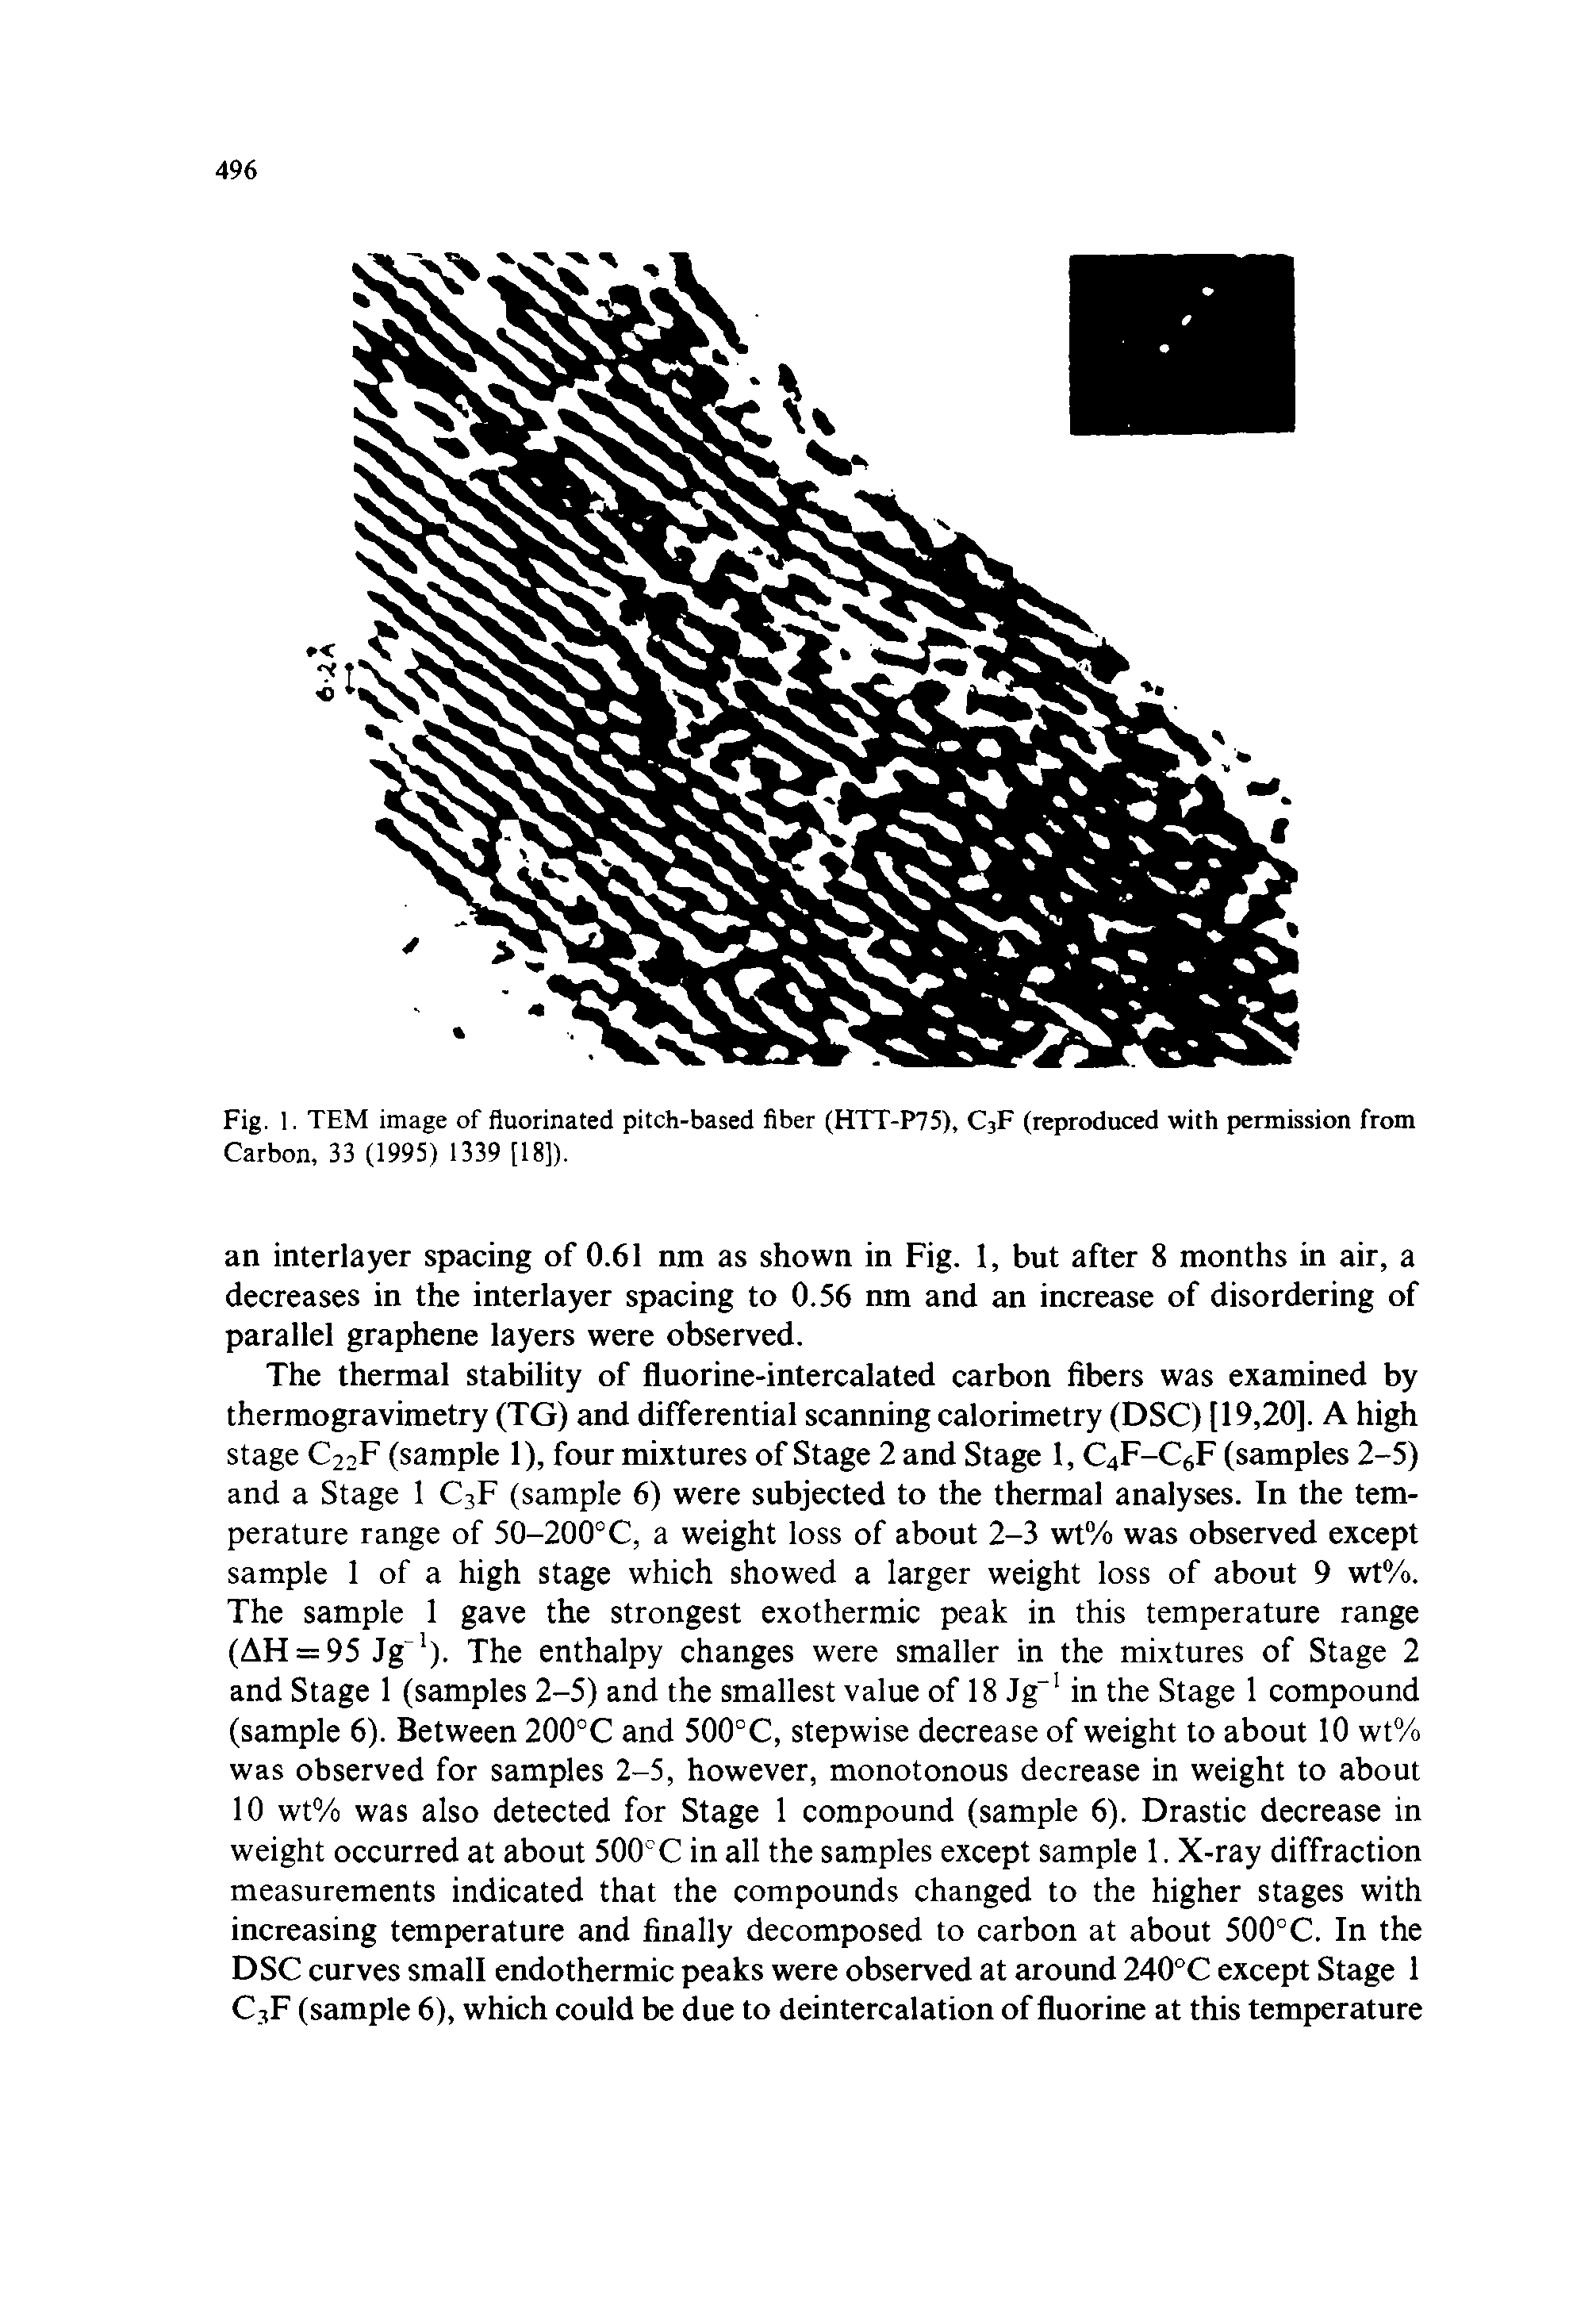 Fig. 1. TEM image of fluorinated pitch-based fiber (HTT-P75), C3F (reproduced with permission from Carbon, 33 (1995) 1339 [18]).